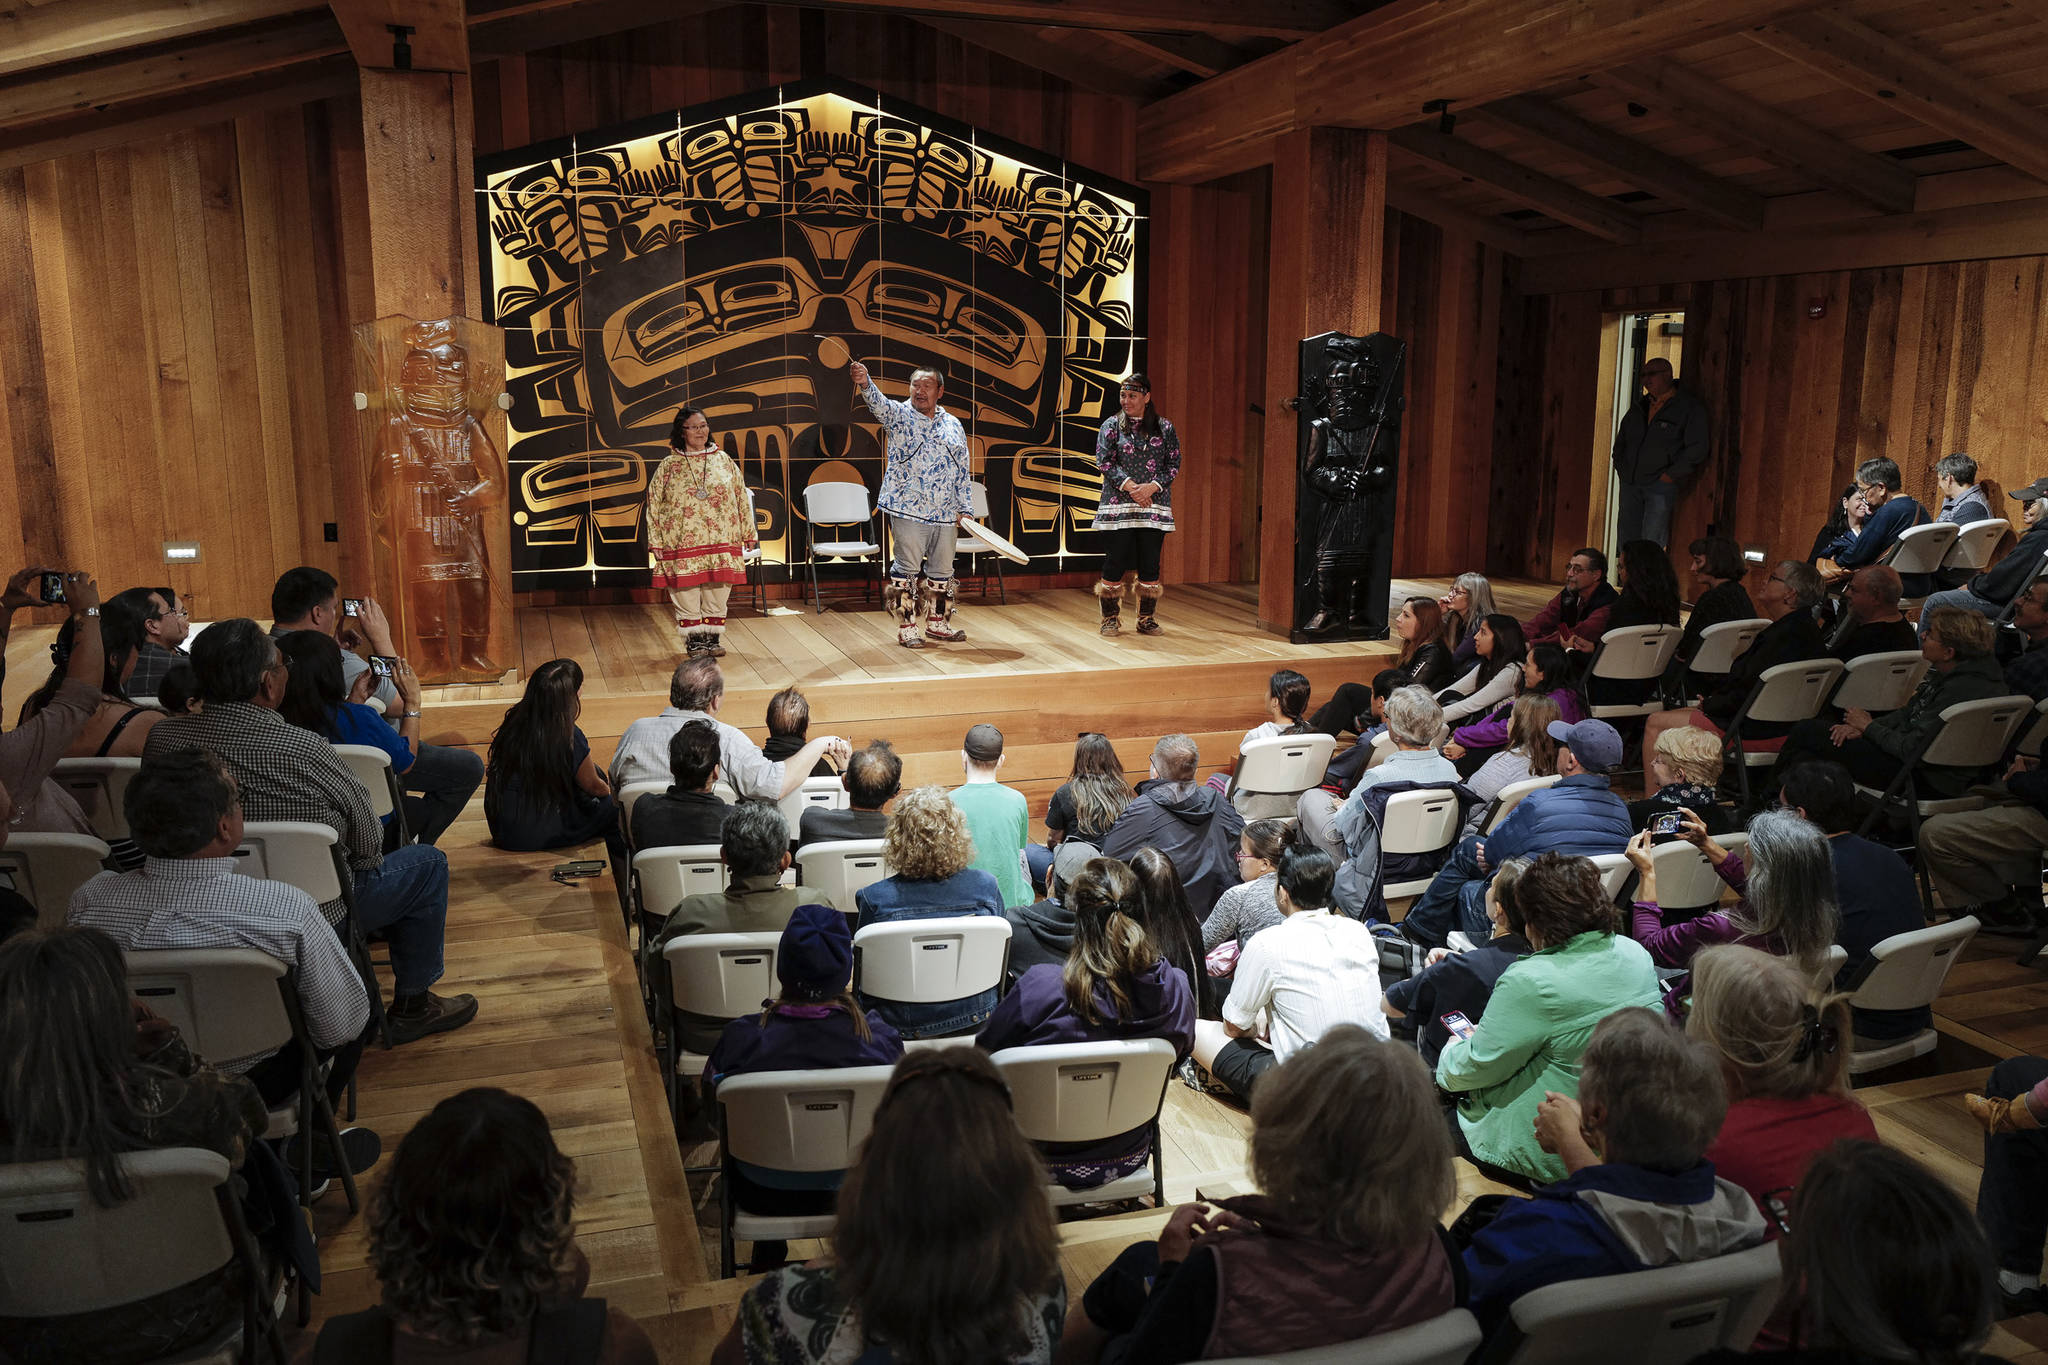 Sealaska Heritage Institute Artists-in-Residence John Waghiyi and his wife, Arlene Annogiyuk Waghiyi, from Savoonga, perform St. Lawrence Island dancing and song with their niece, Rene Mokiyuk, right, at the Walter Soboleff Center on Wednesday, Aug. 28, 2019. (Michael Penn | Juneau Empire)